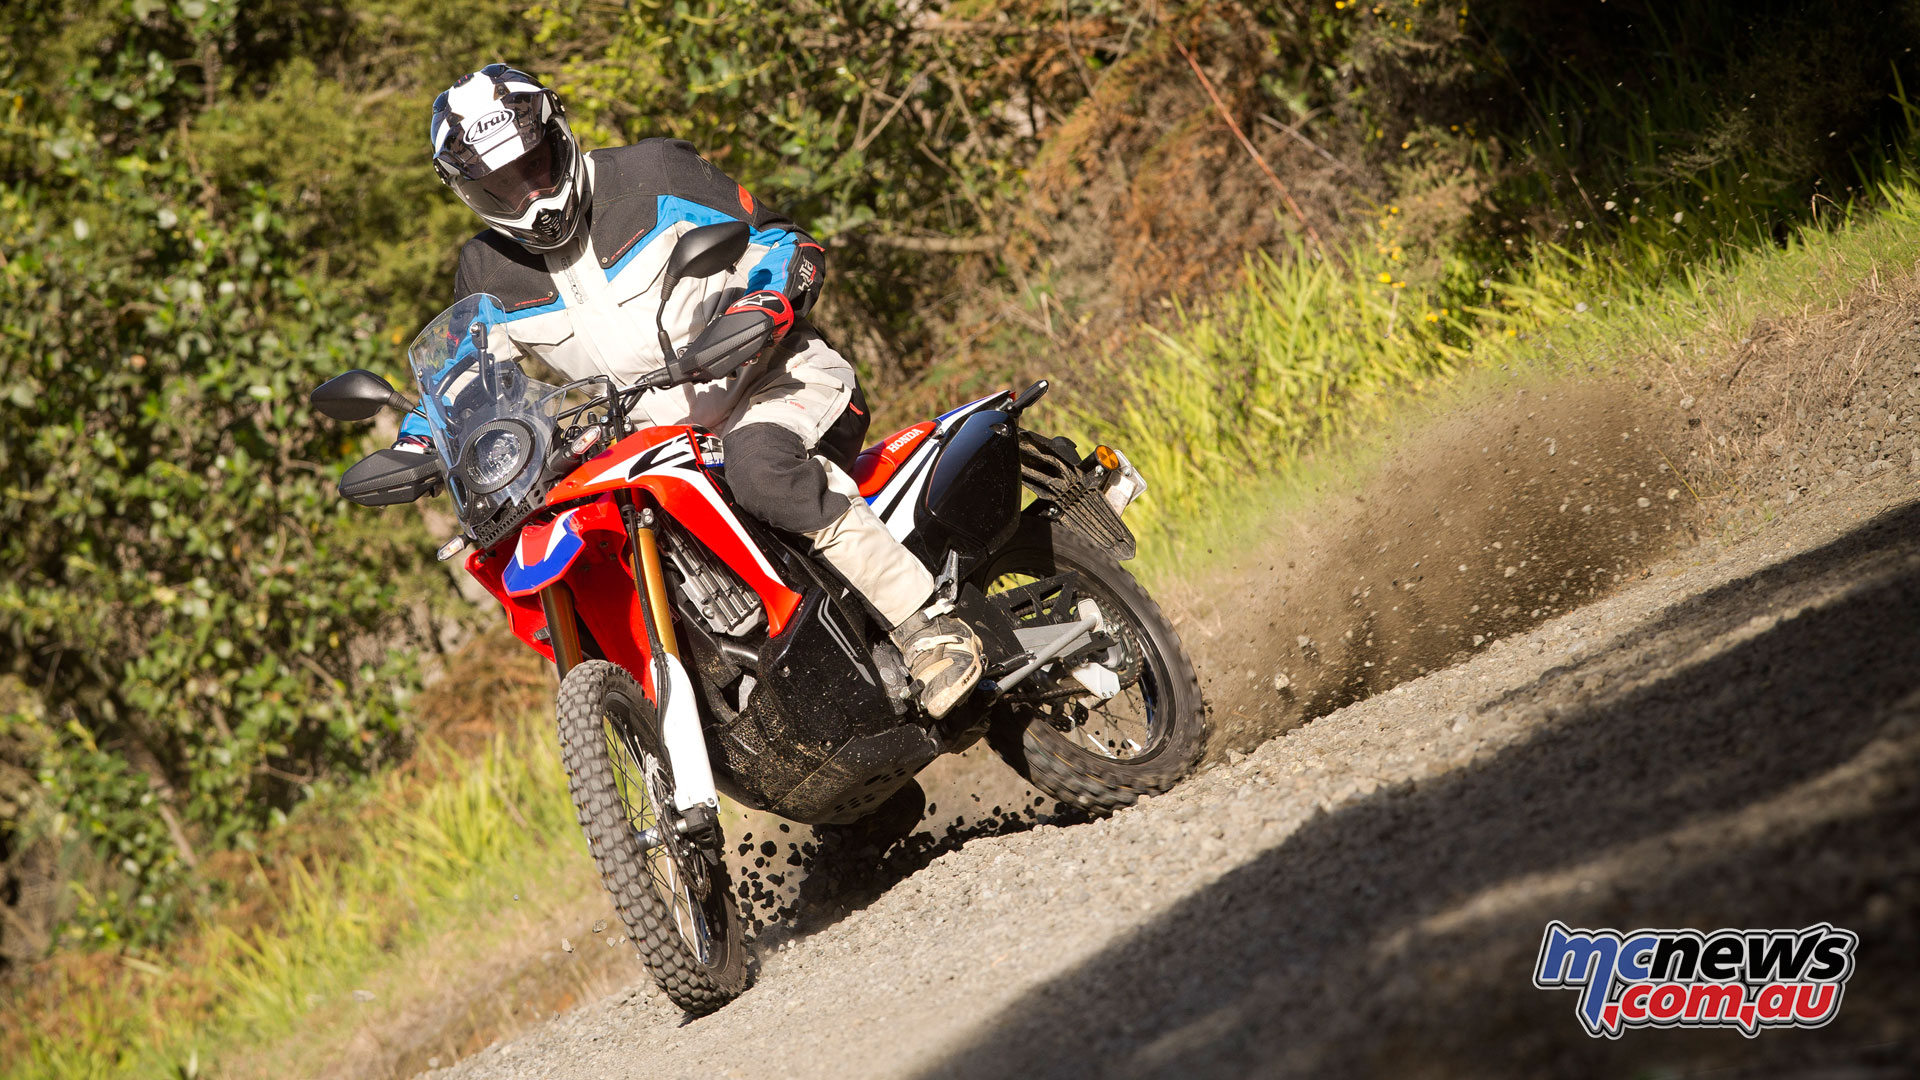 18 Honda Crf250l Rally Motorcycle Test Motorcycle News Sport And Reviews